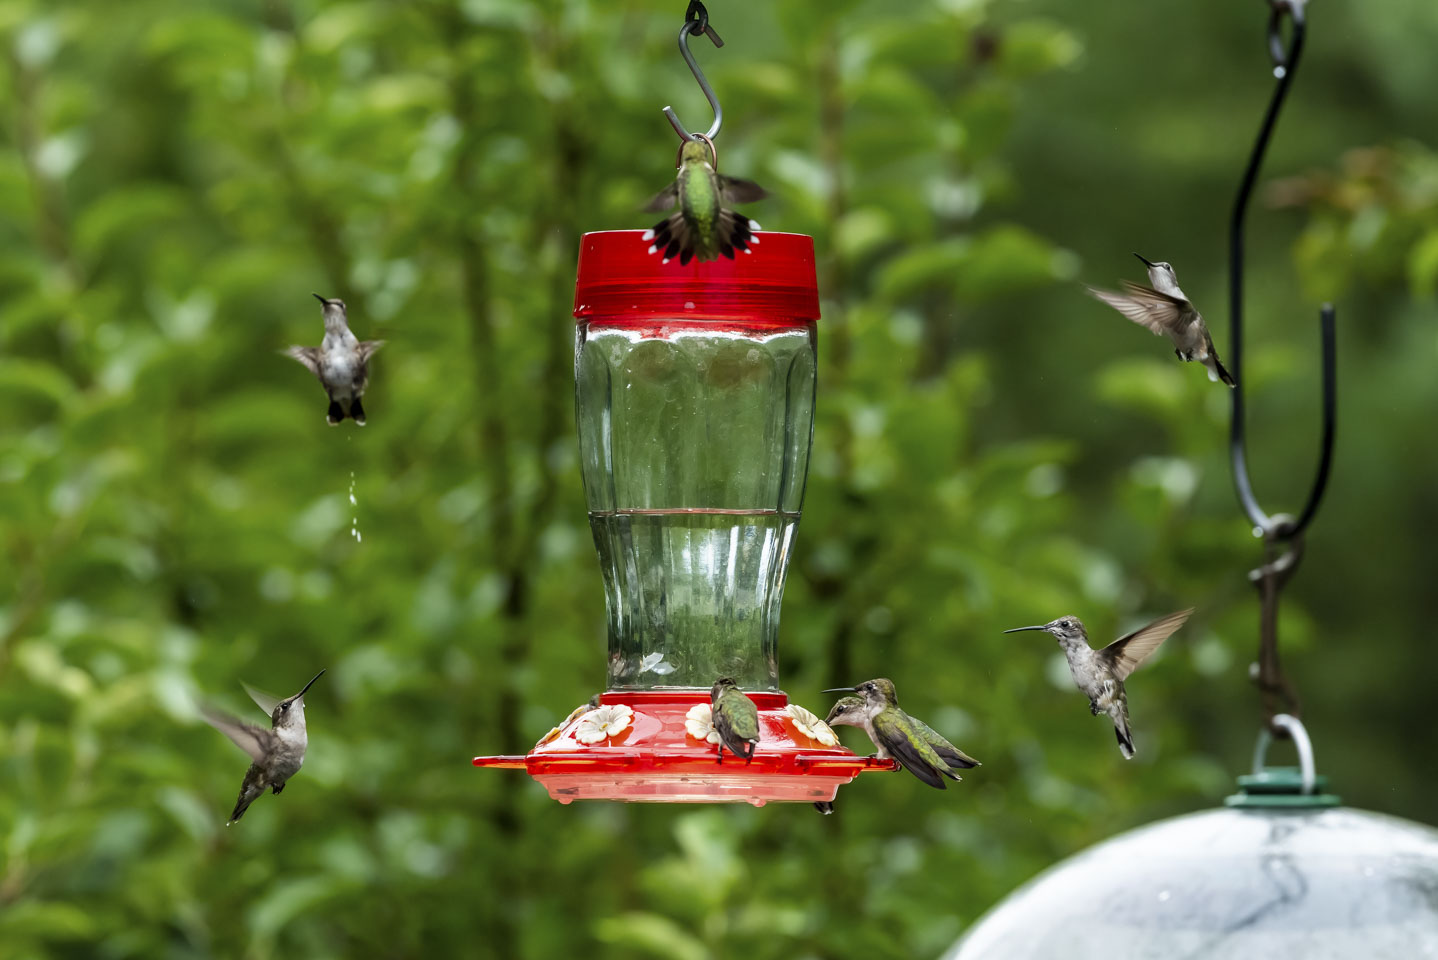 hummingbird feeder with many birds around it, including one pooping